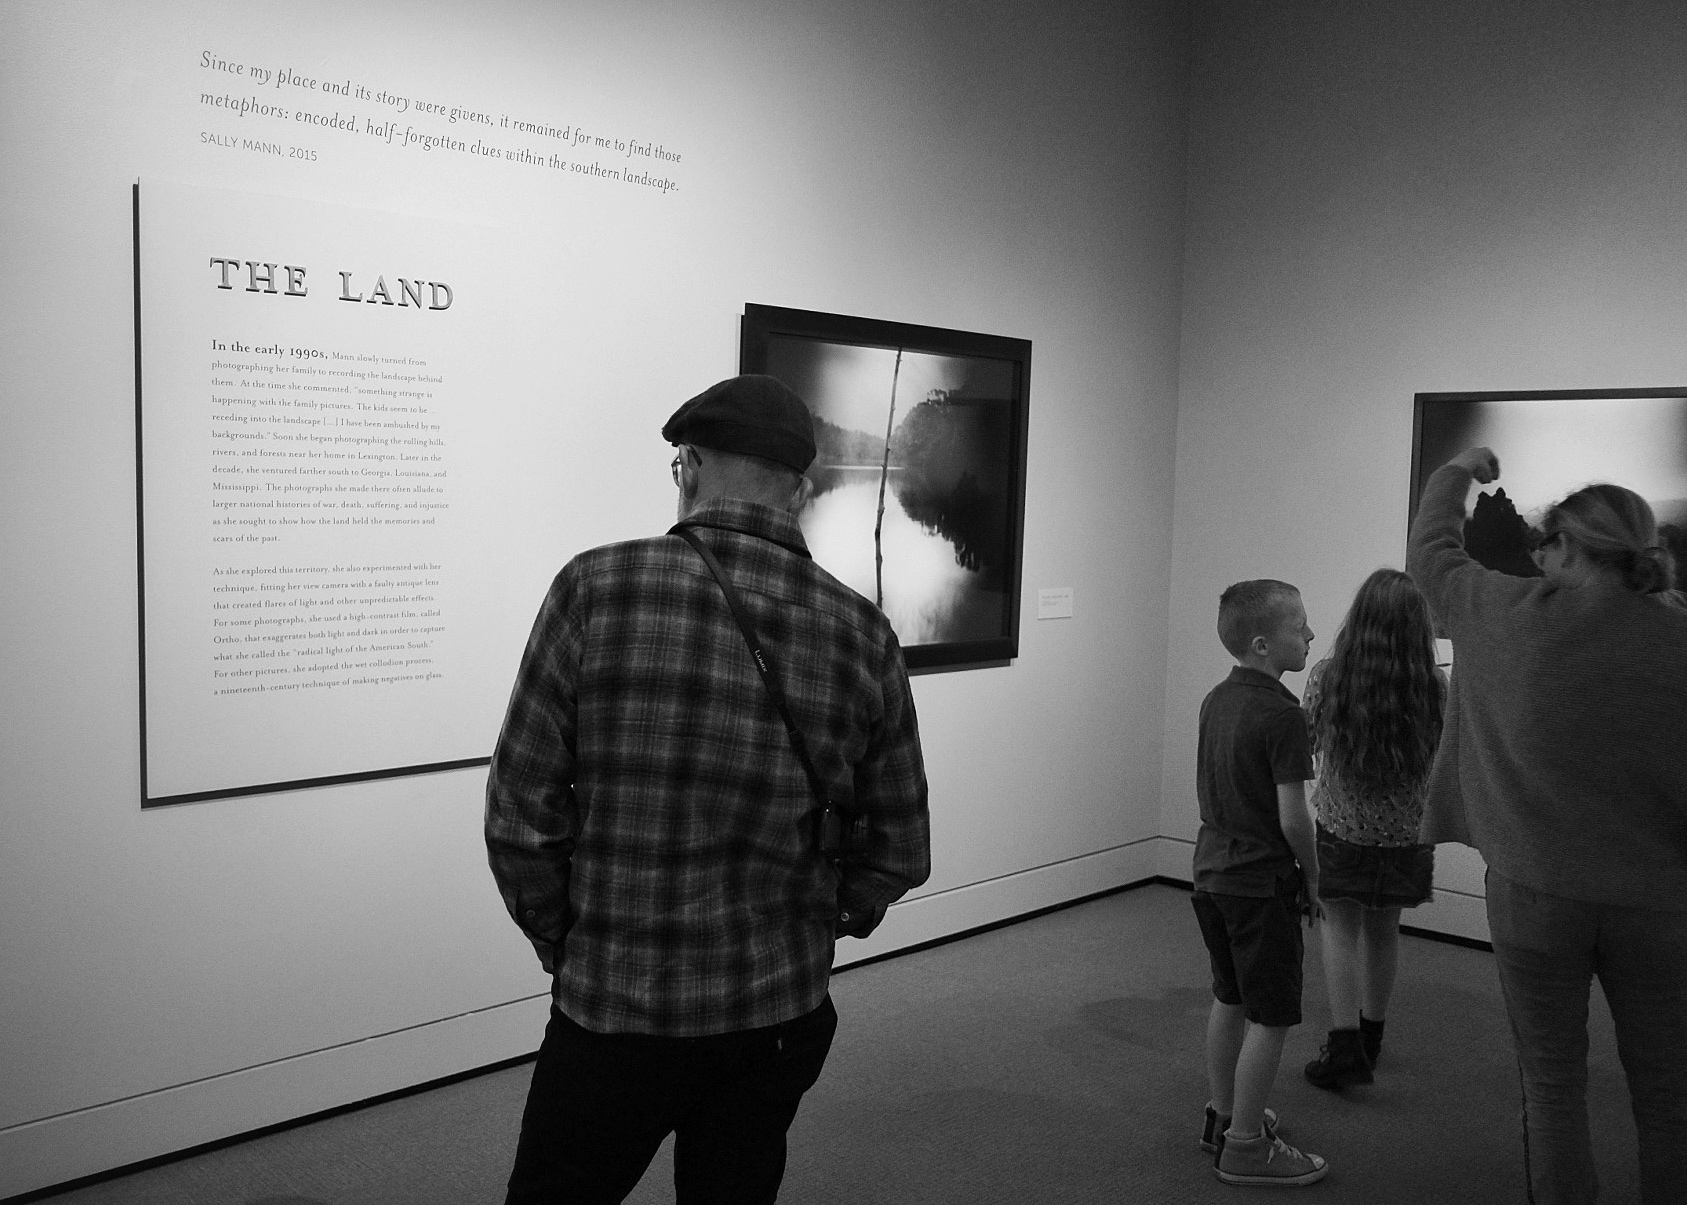 The Land: Since my my place and its story were givens, it remained for me to find those metaphors: encoded, half-forgotten clues within the southern landscape — Sally Mann 2015